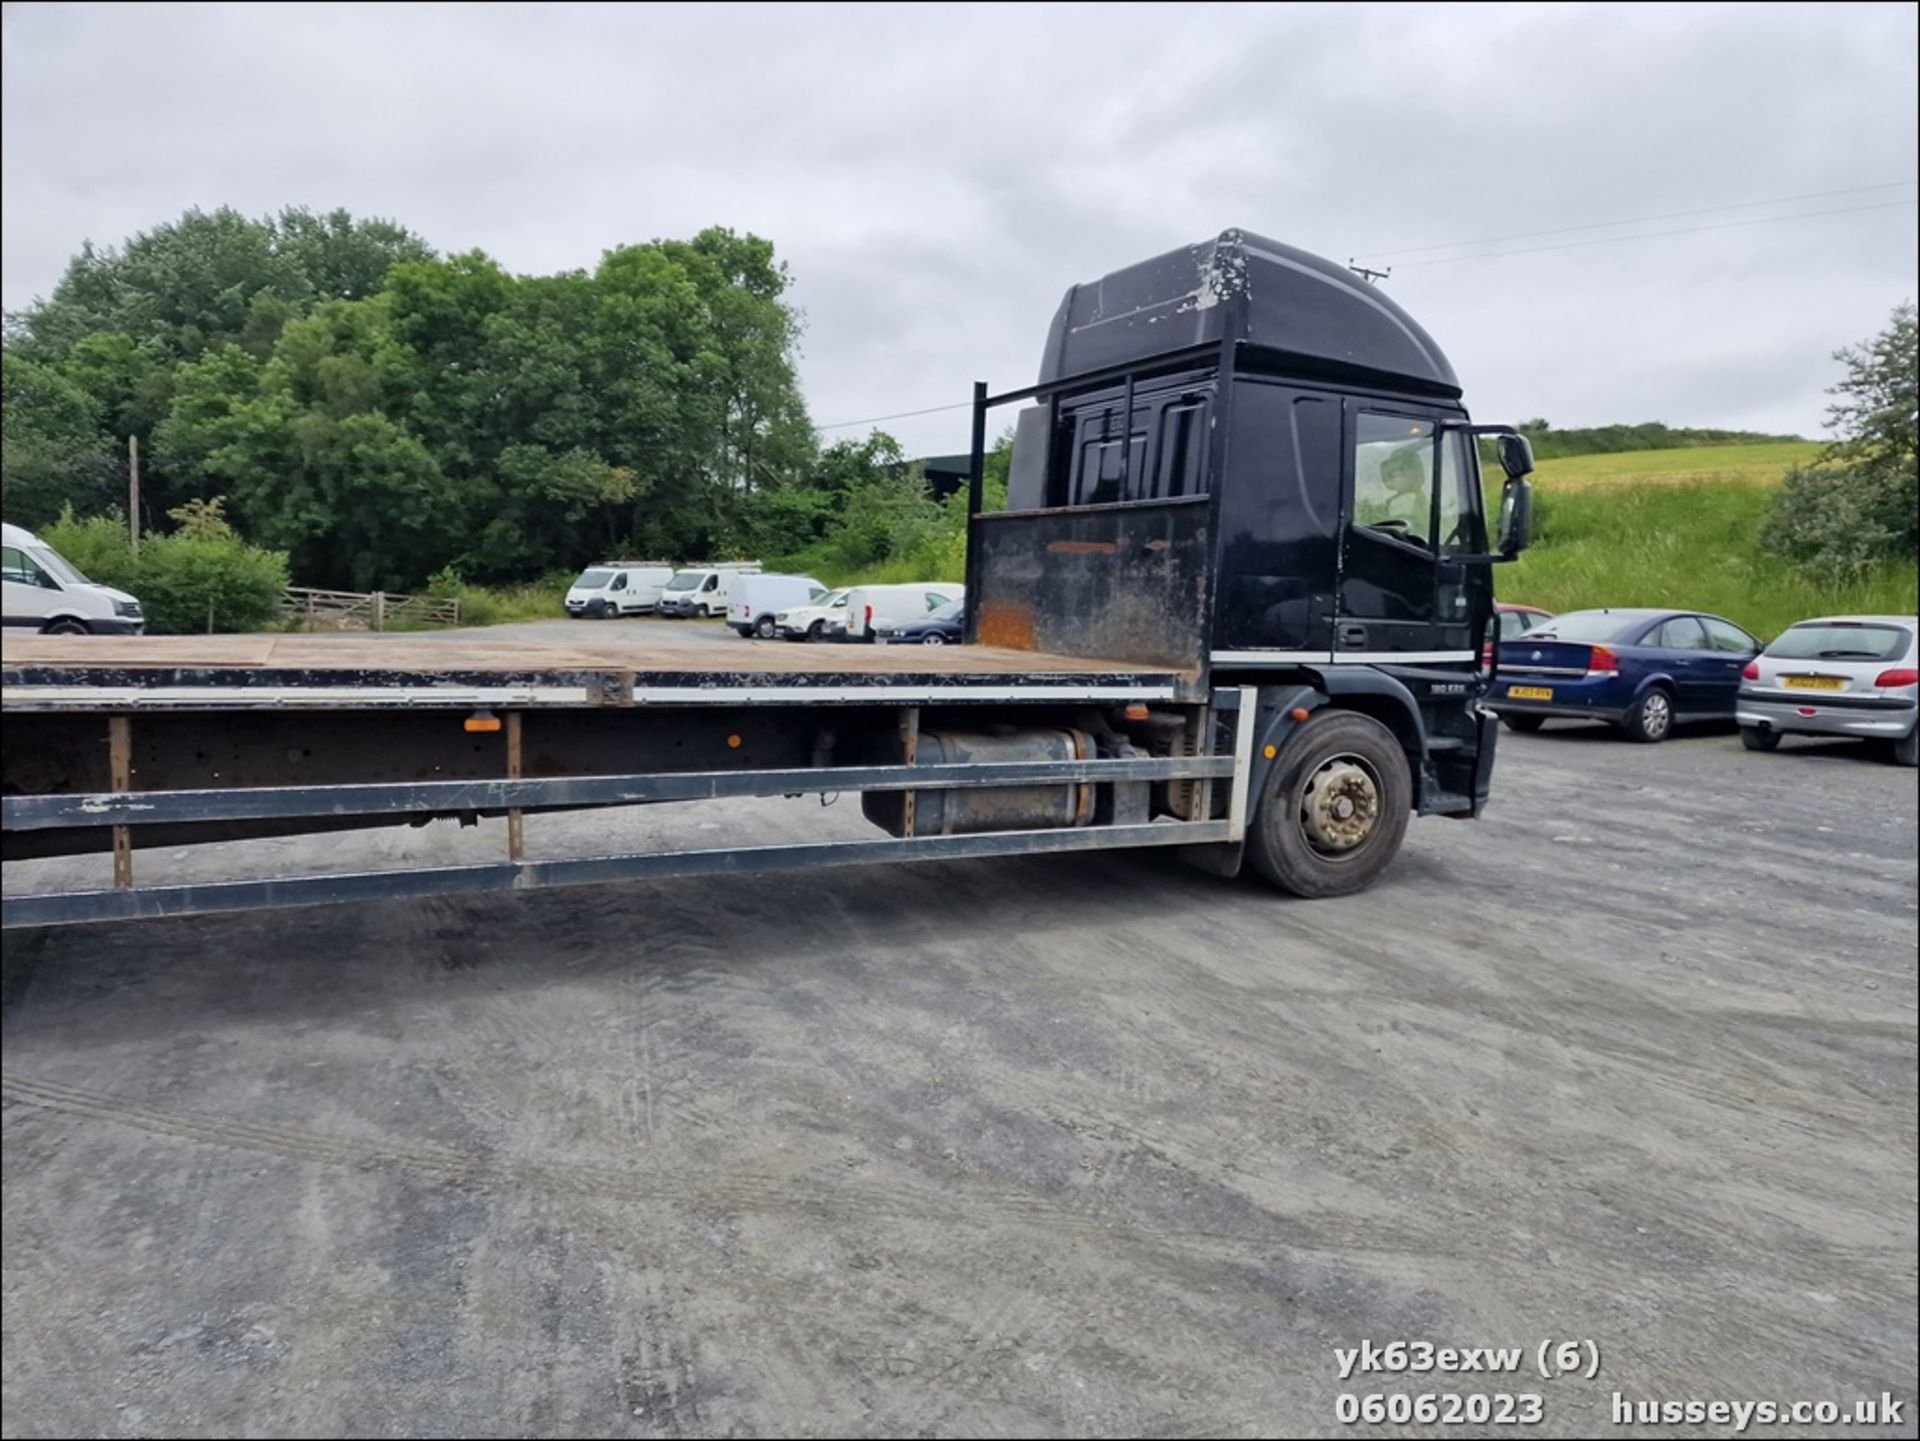 13/63 IVECO EUROCARGO (MY 2008) - 5880cc 2dr Flat Bed (Black) - Image 6 of 21